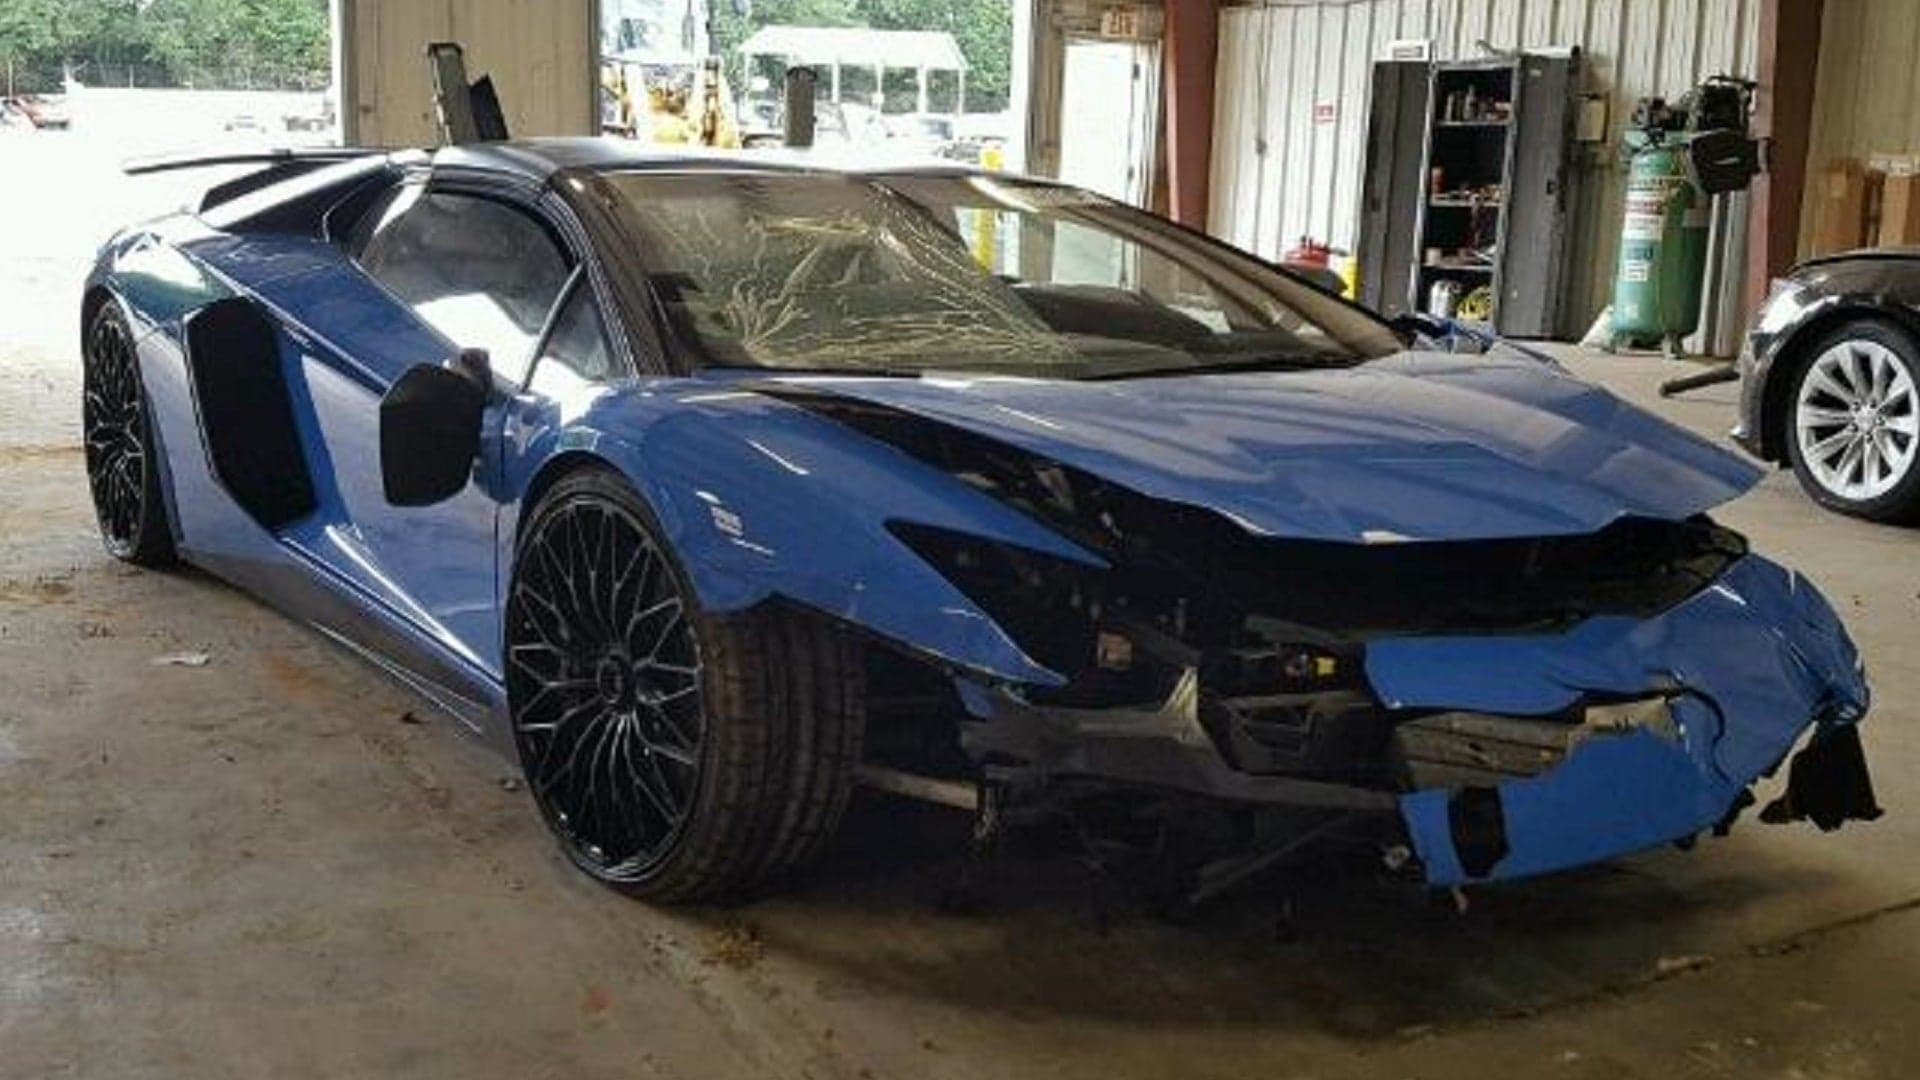 This Lamborghini Aventador SV Only Made It 73 Miles Before Being Totaled